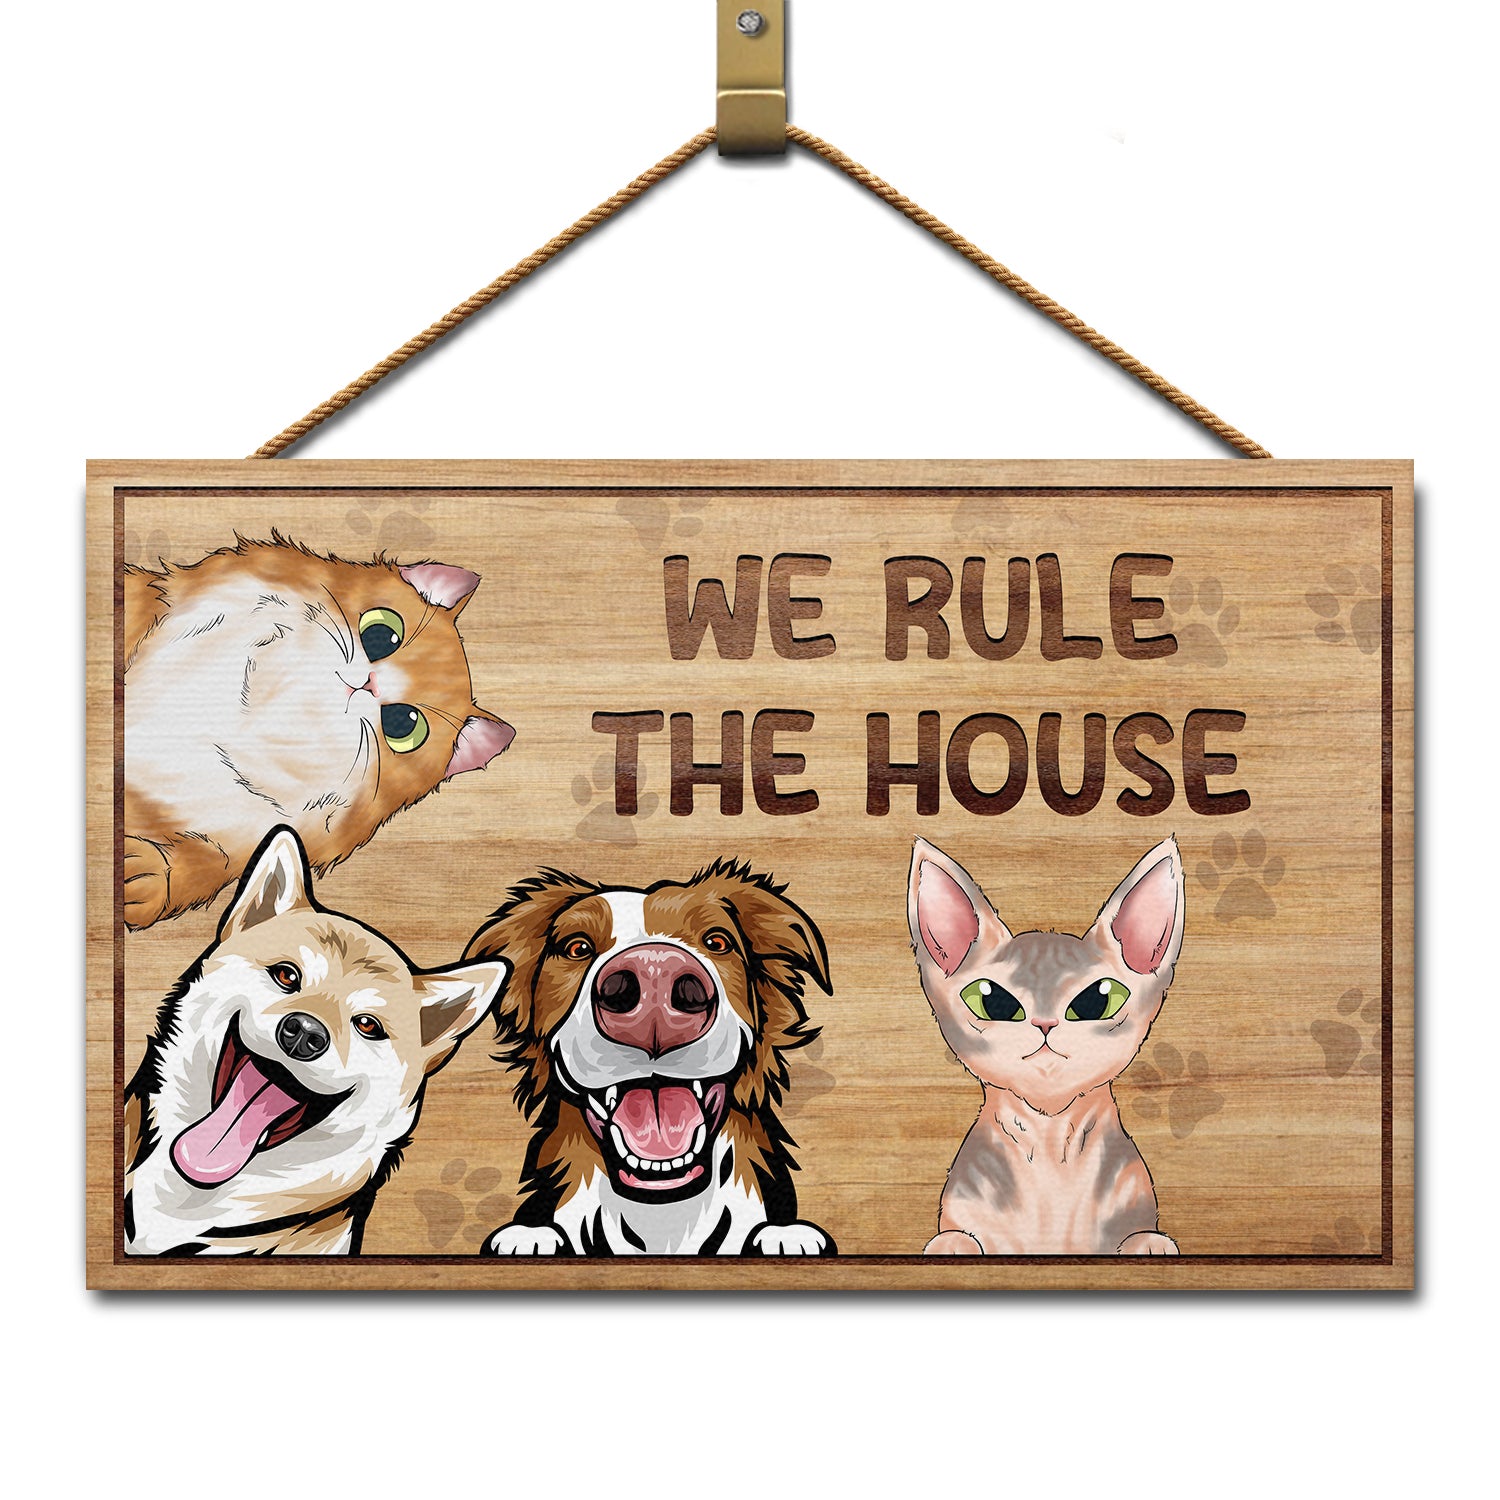 We Rule The House - Home Decor, Birthday, Housewarming Gift For Dog Lovers & Cat Lovers - Personalized Custom Wood Rectangle Sign